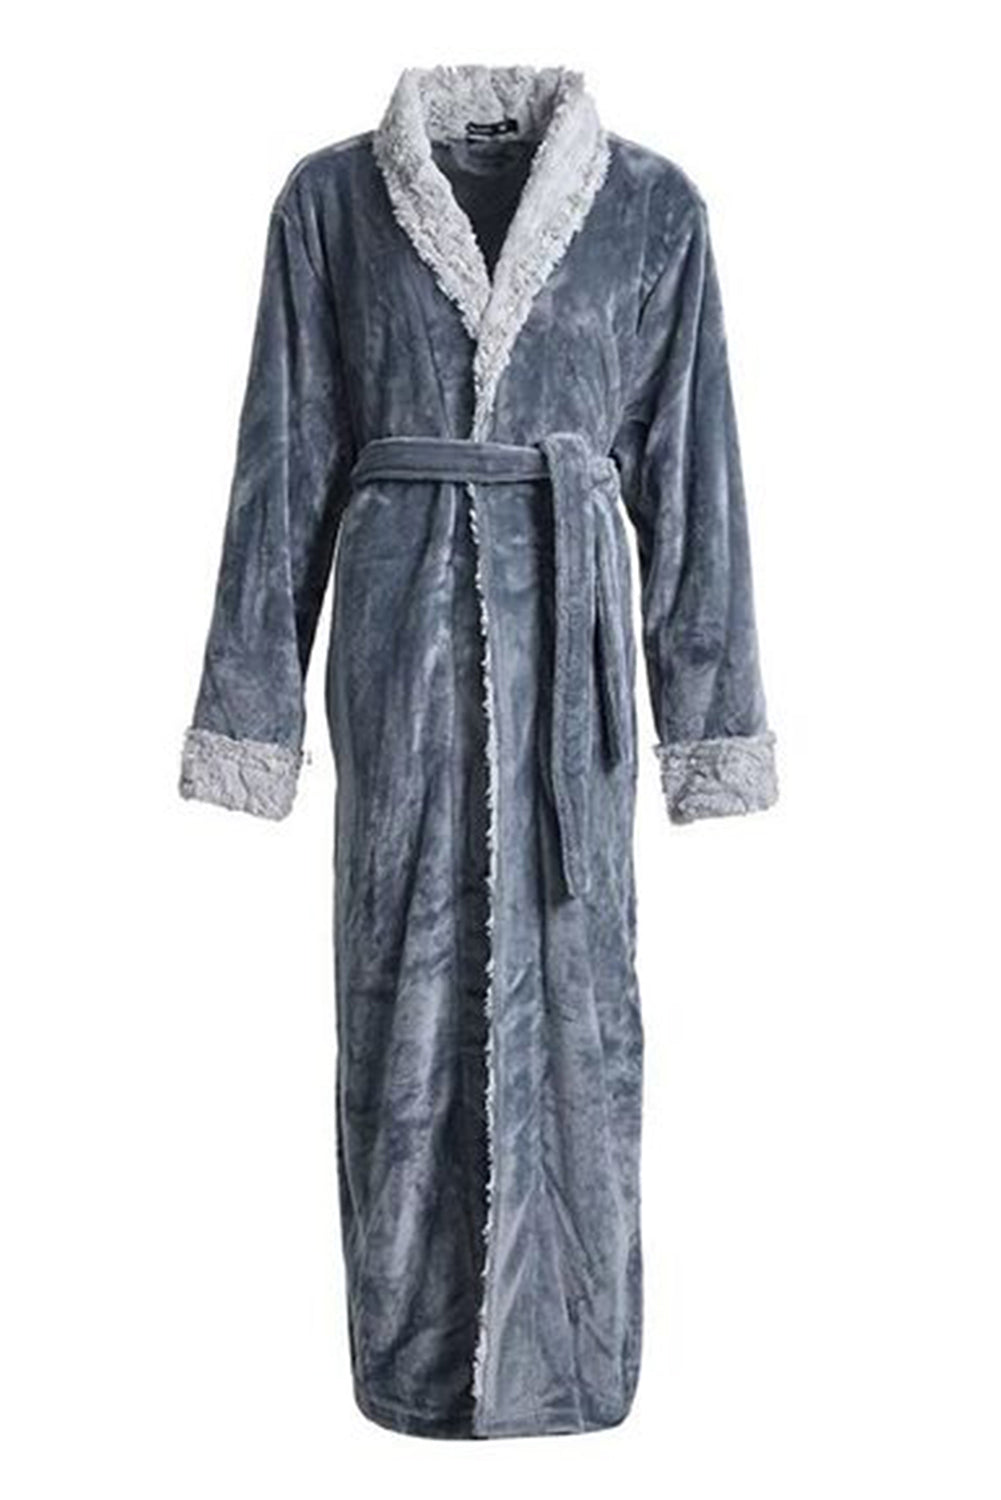 LC453040-11-M, LC453040-11-L, LC453040-11-XL, Gray Women's Solid Color Long Sleeve V Neck House Sleepwear Loungewear Bathrobe With Belt